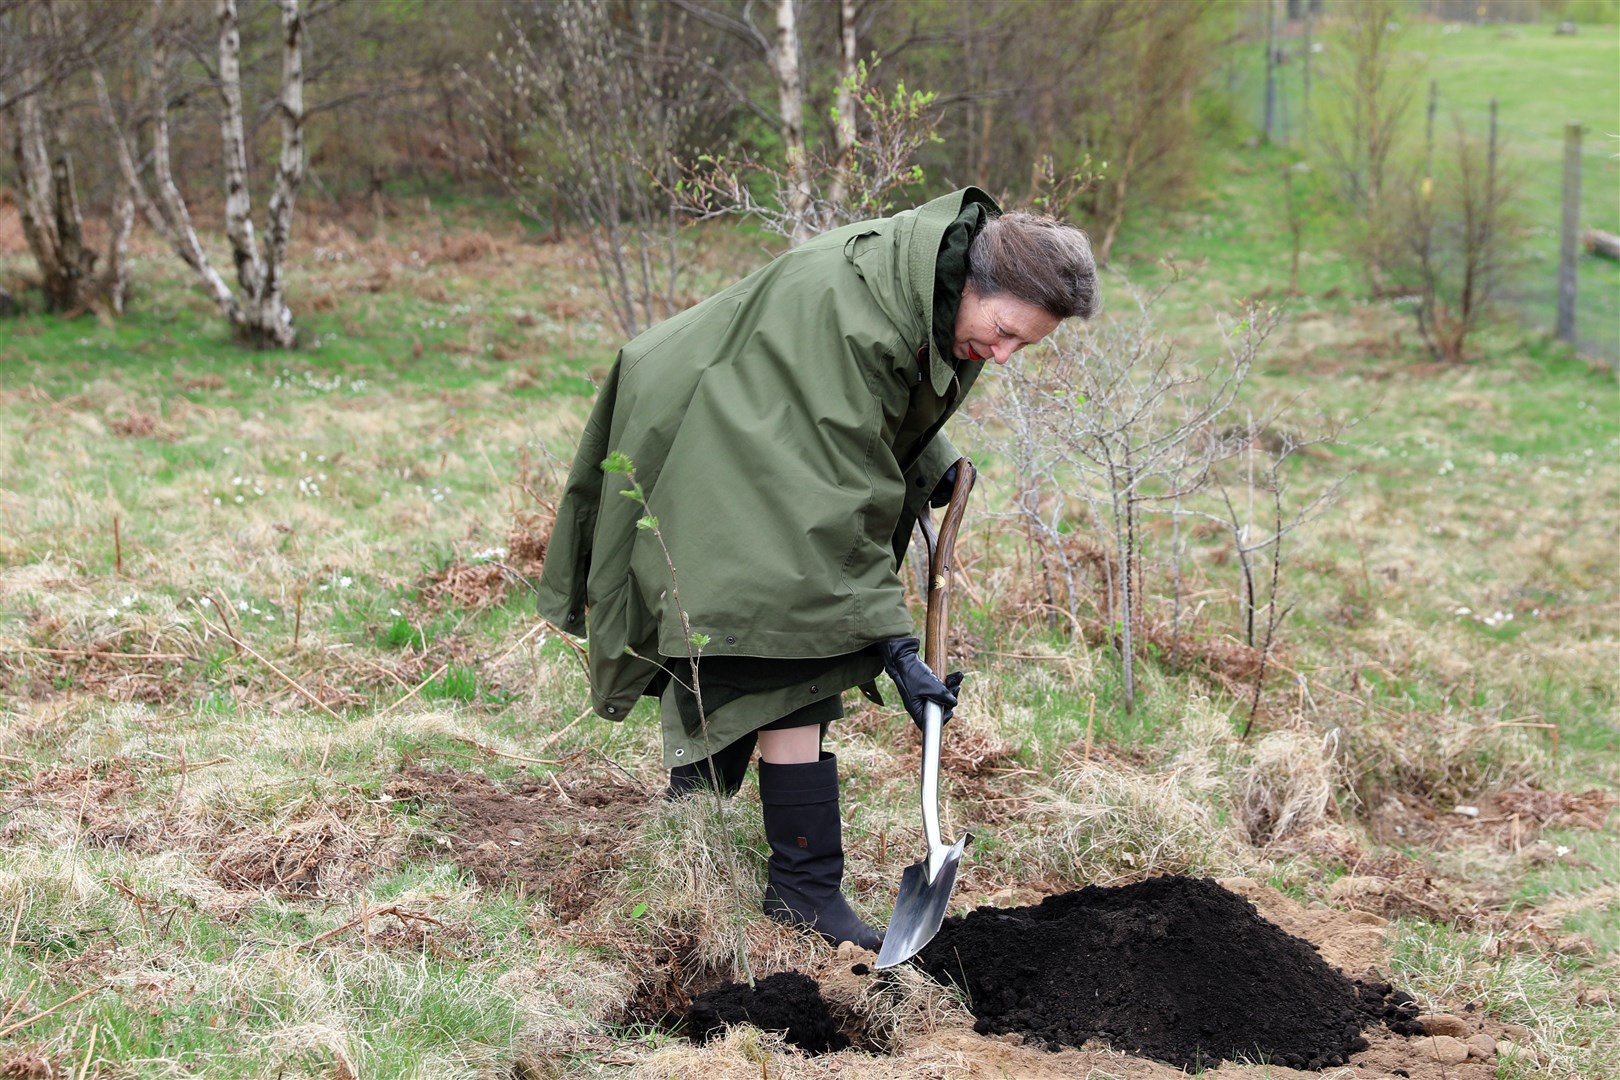 HRH The Princes Royal plants the tree at the site of one of proposed sites of the discovery centre's hubs.